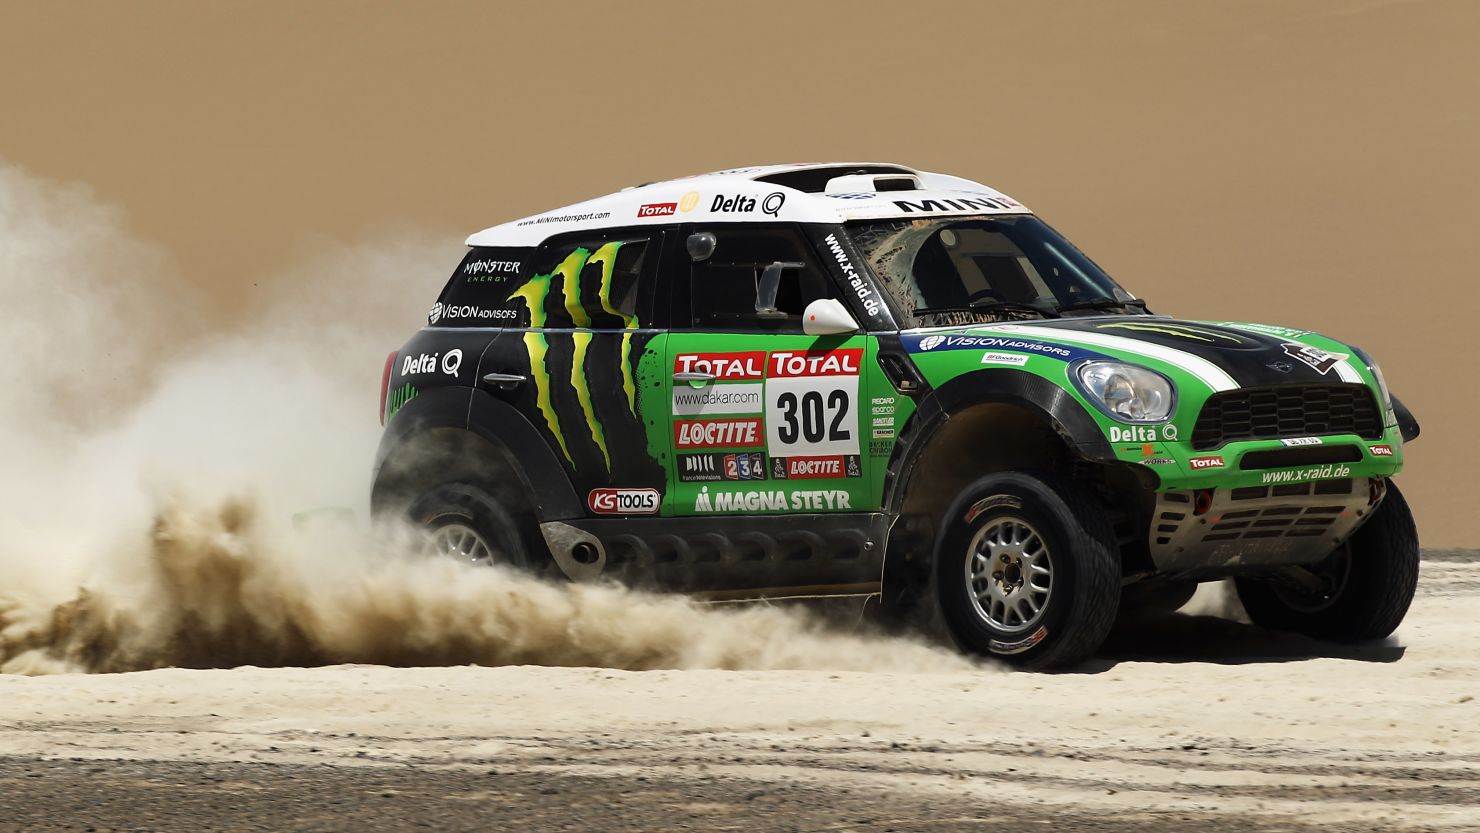 France's Stephane Peterhansel drives his Mini during stage 13 of the 2012 Dakar Rally from Nasca to Pisco in Peru